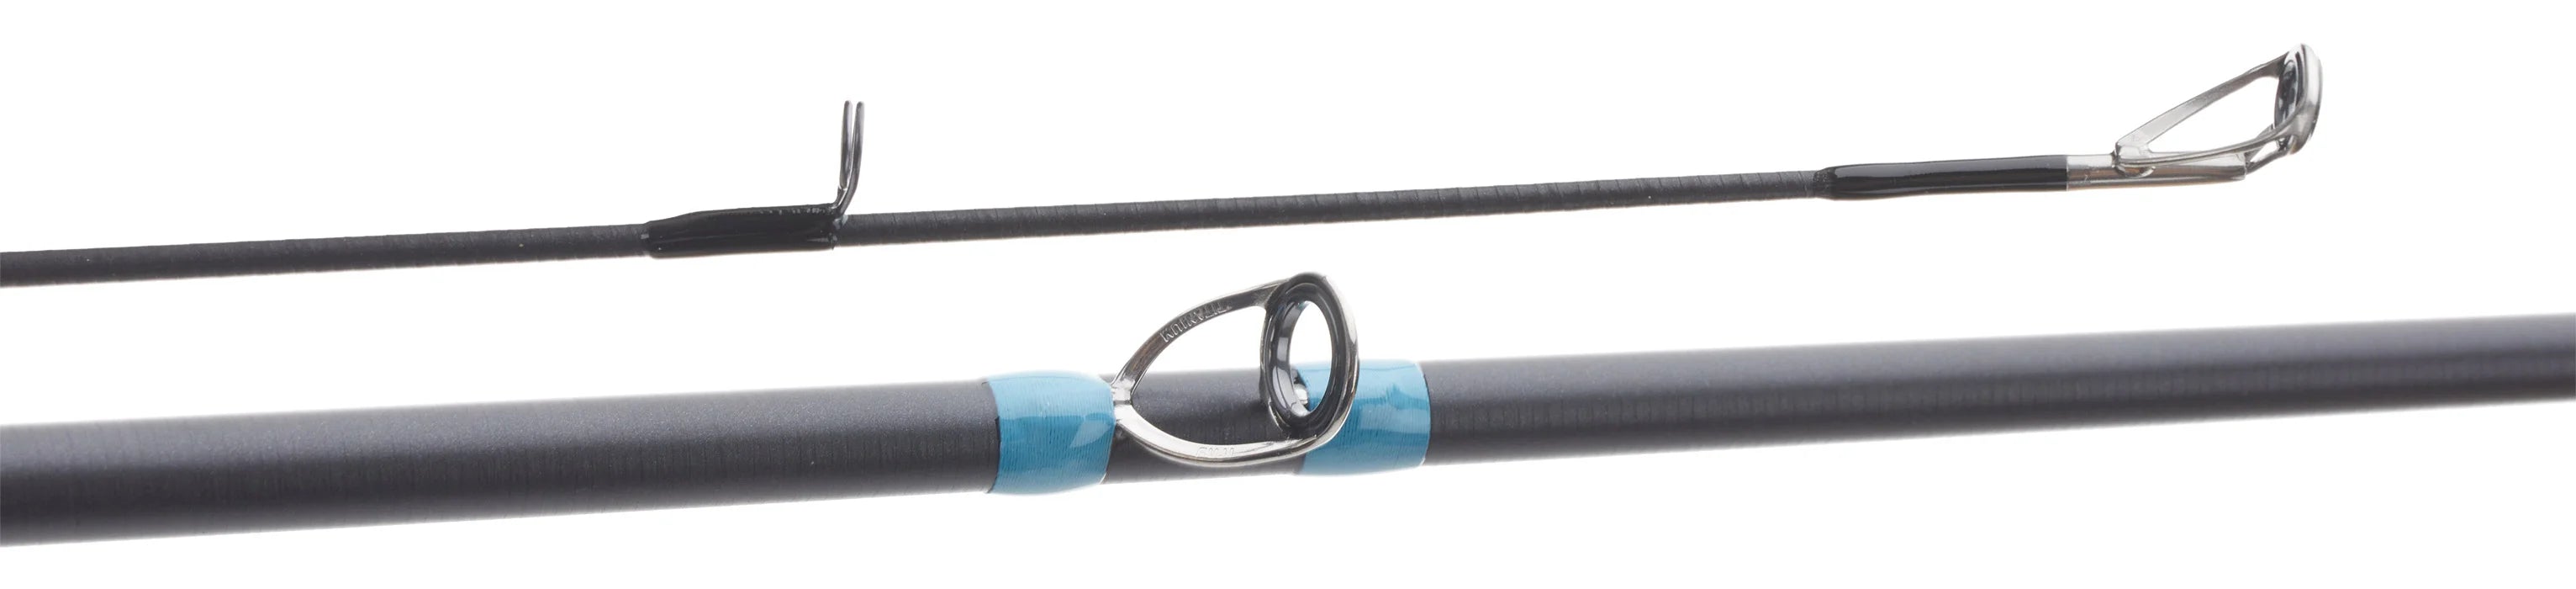 G. LOOMIS NRX+ JIG AND WORM CASTING RODS